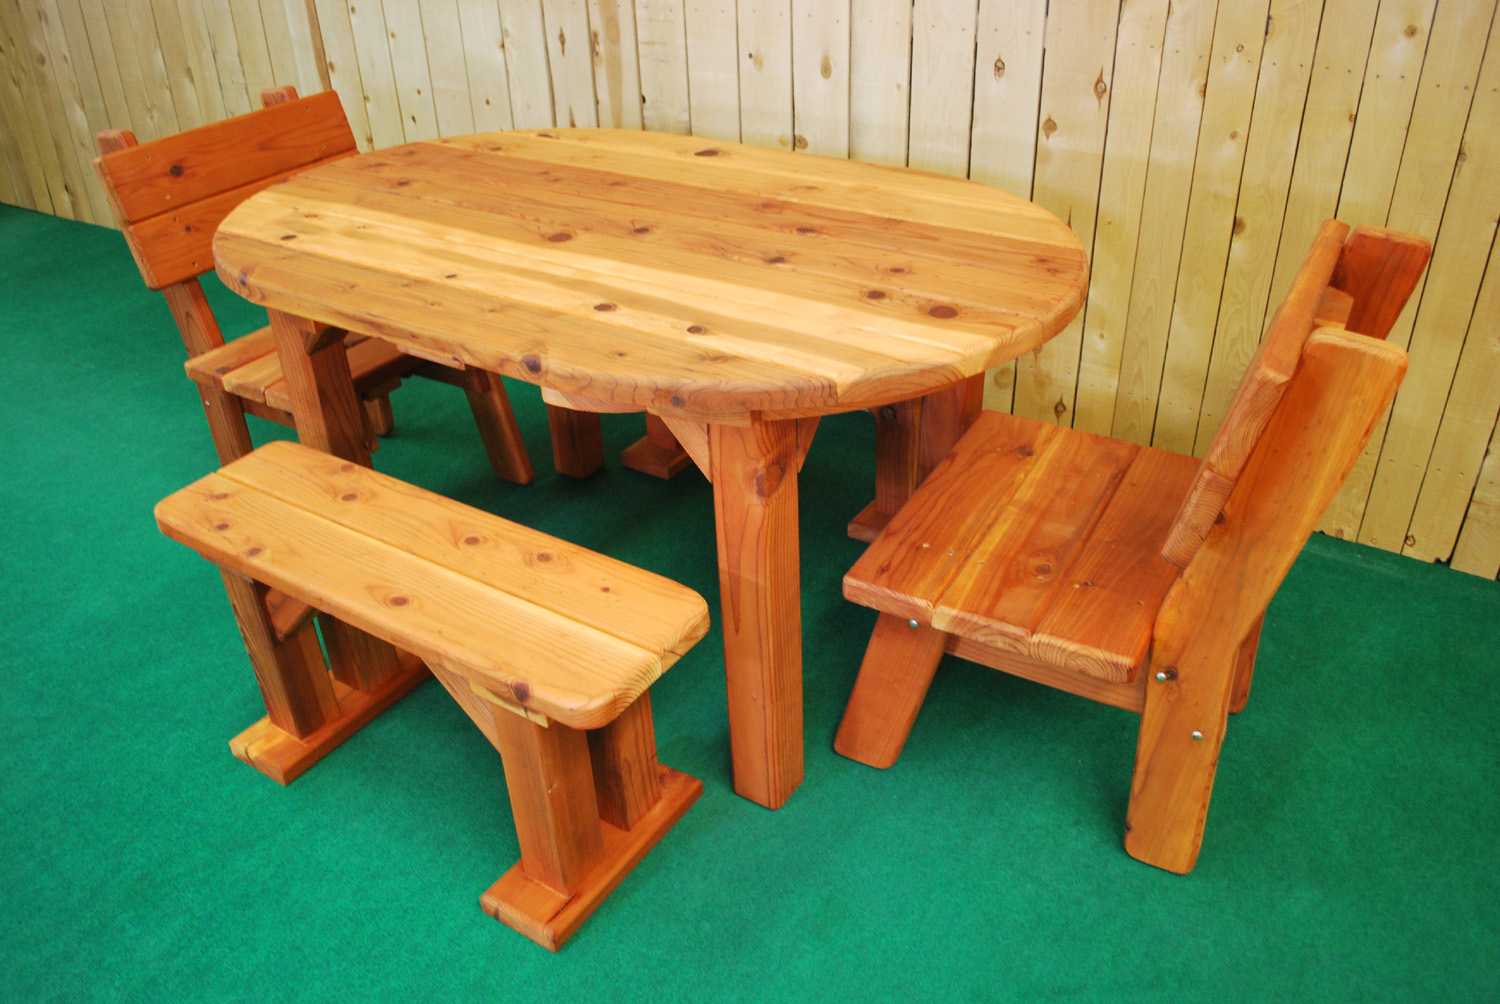 60" redwood oval picnic table